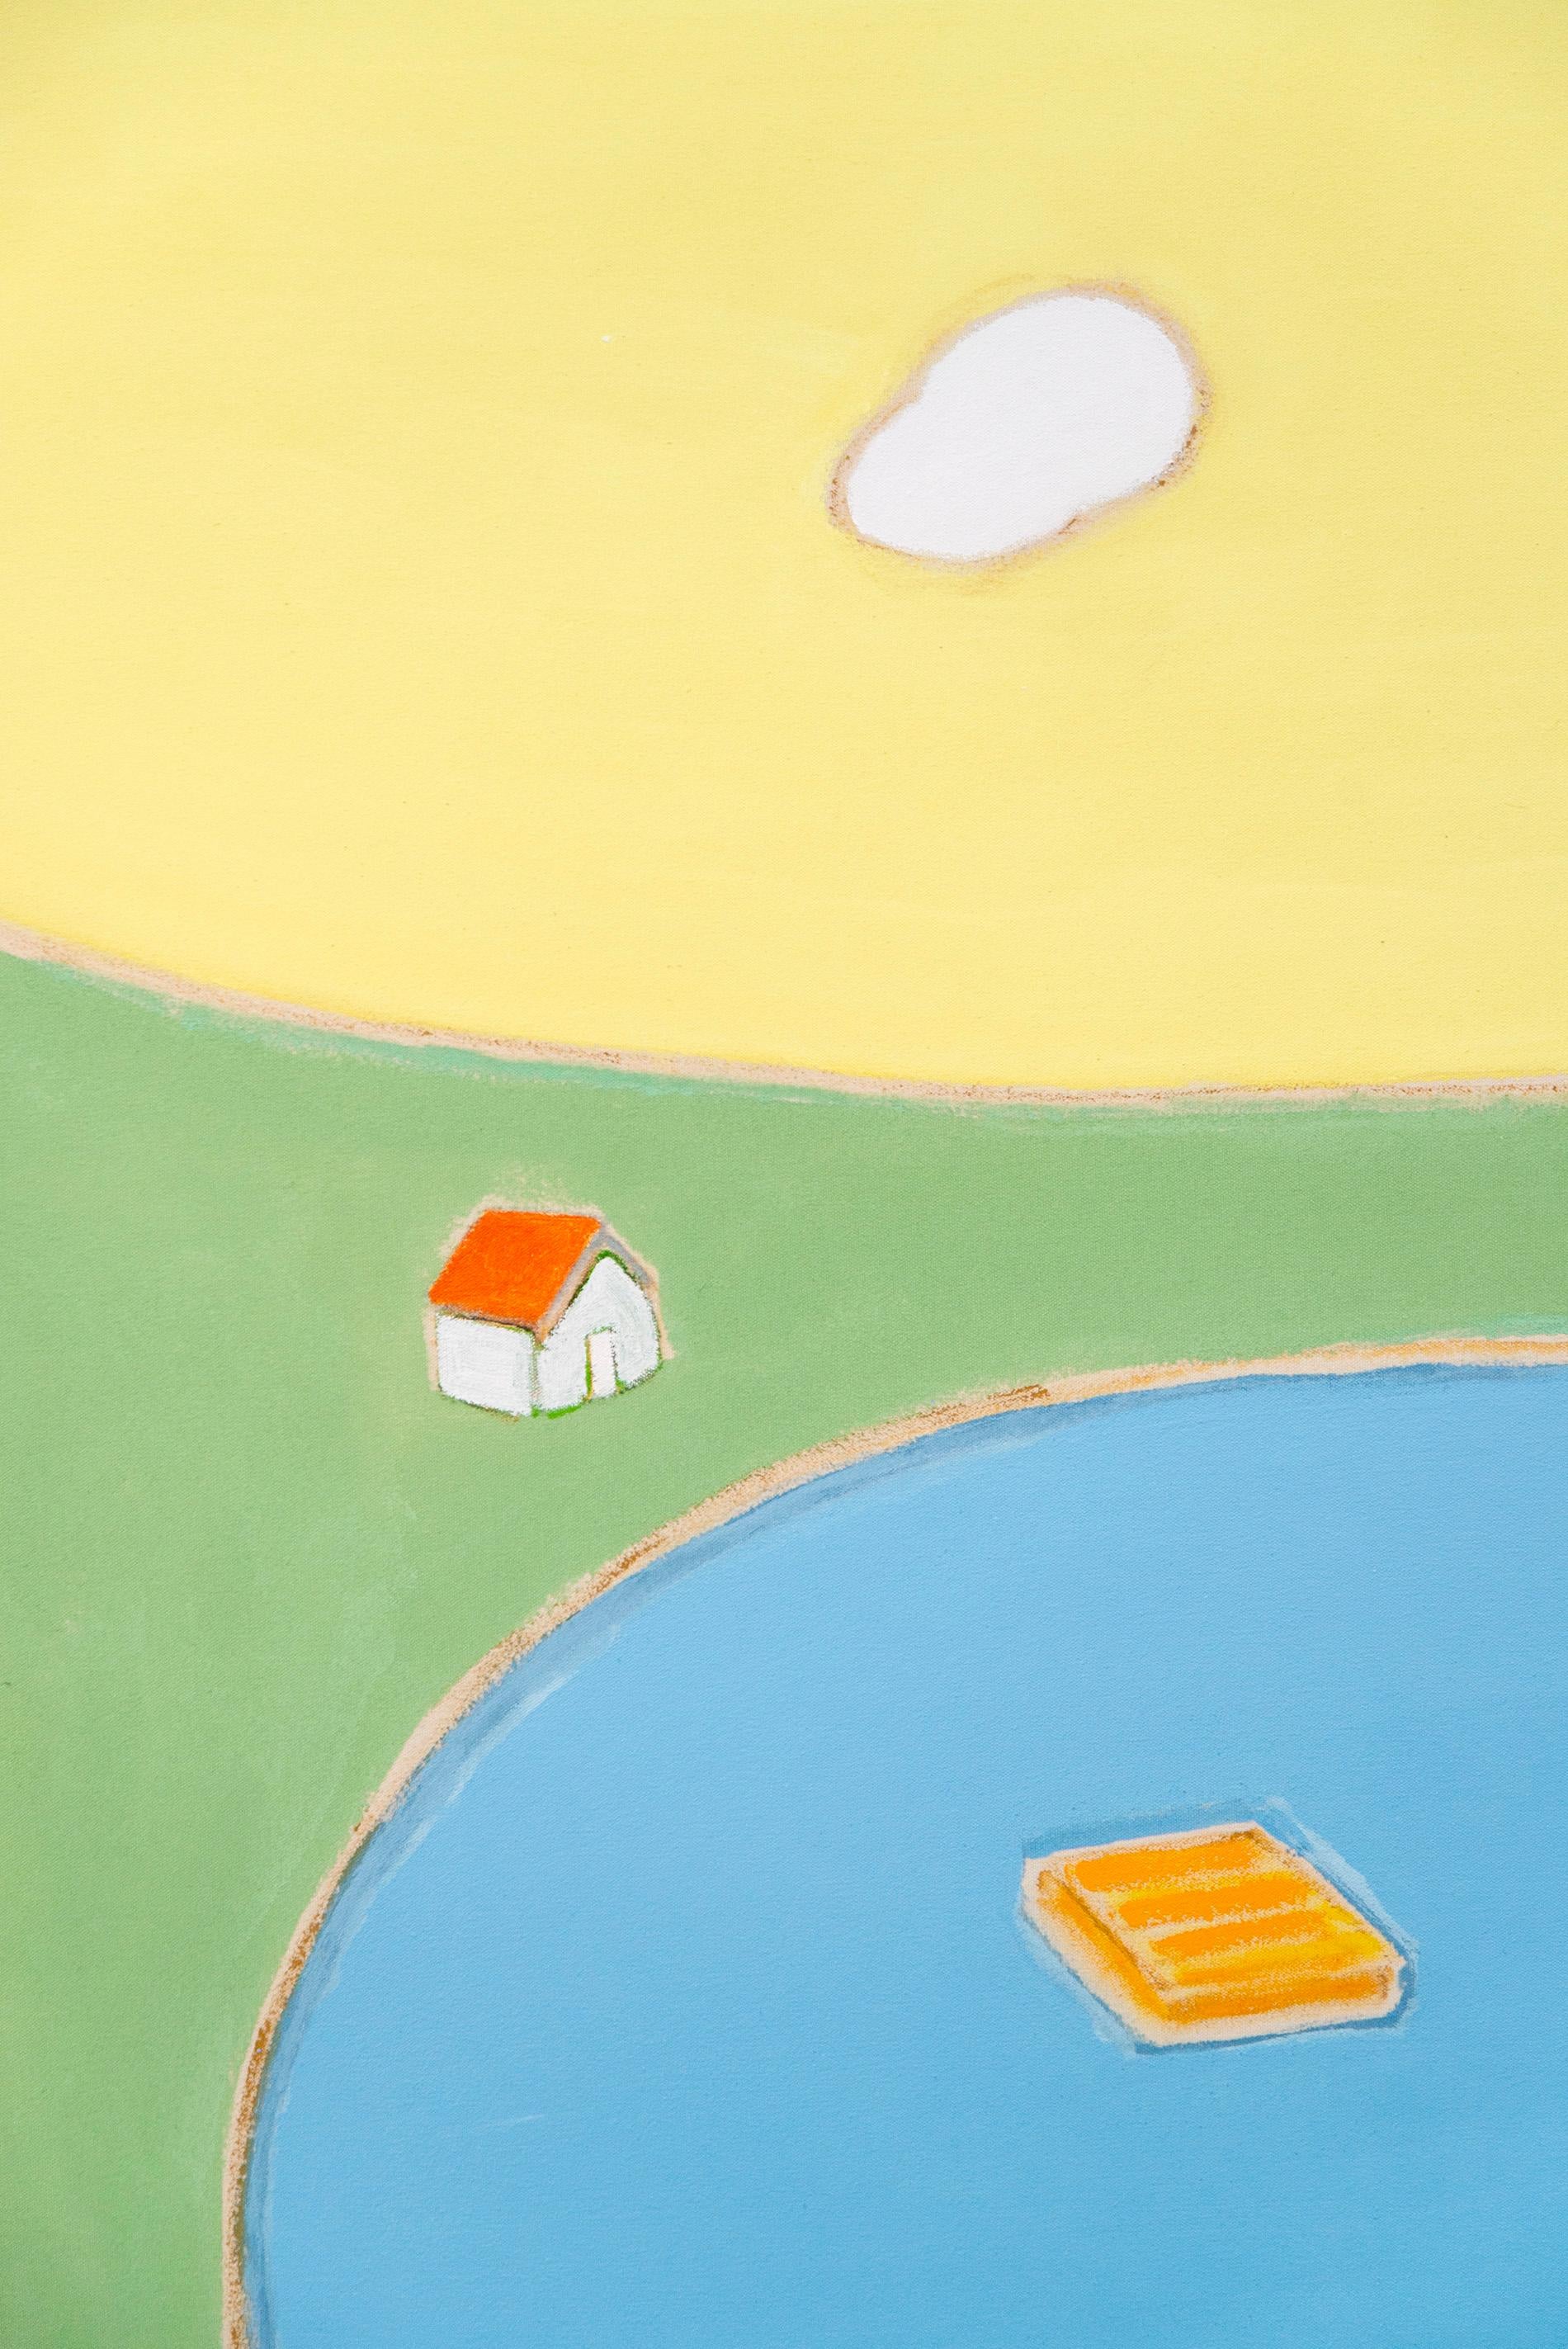 Cottage country—a classic scene is re-imagined in minimalist form and bright colours. This is Pat Service. She is considered one of Canada’s finest landscape artists. Here she recalls the view she enjoyed during many professional artist workshops at